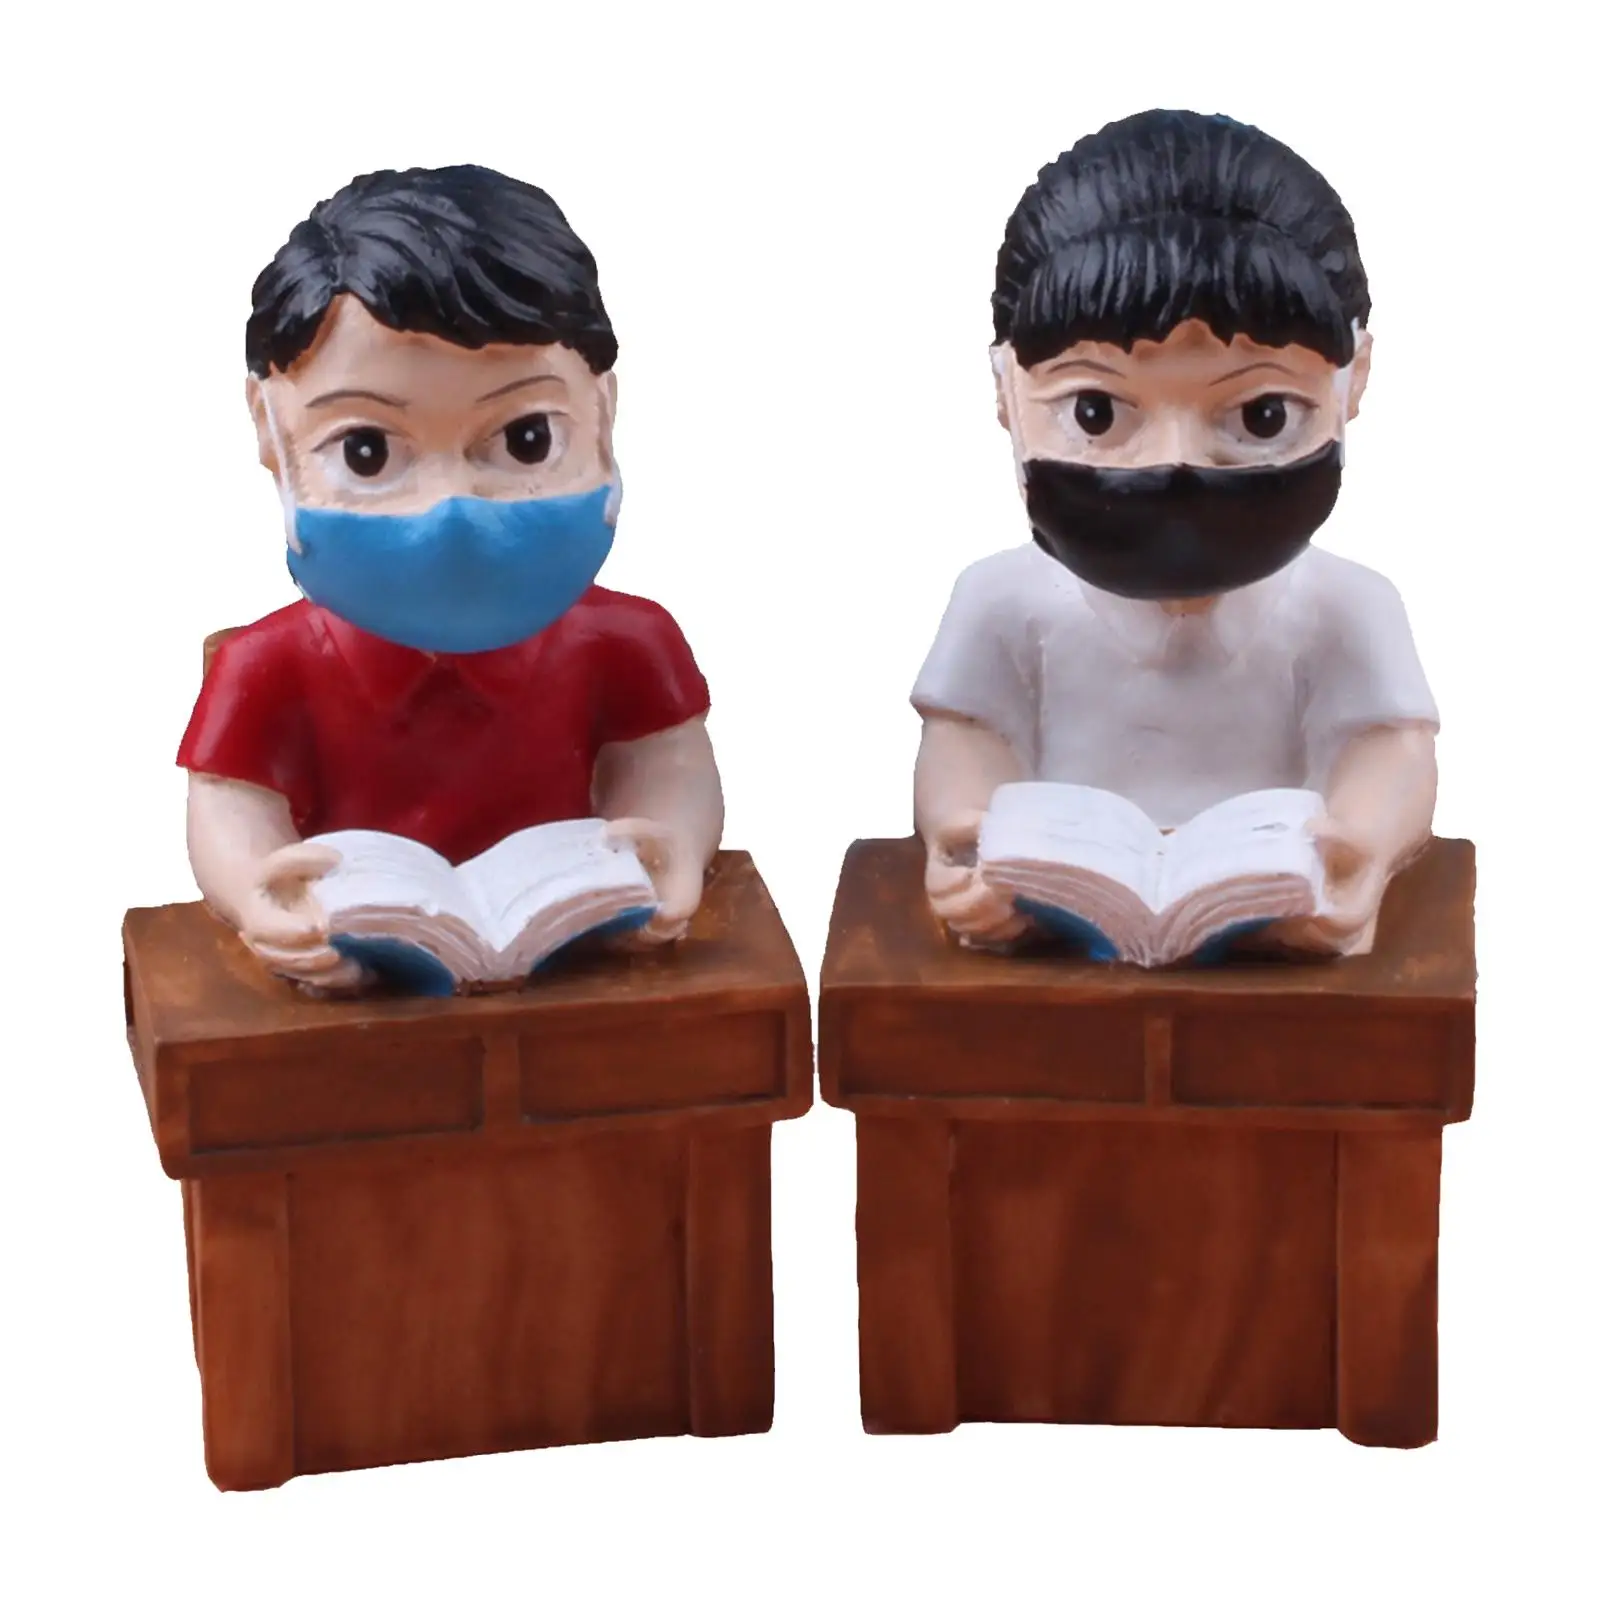 2 Pieces People Figurines Set Tiny People for Sand Table Layout Decoration